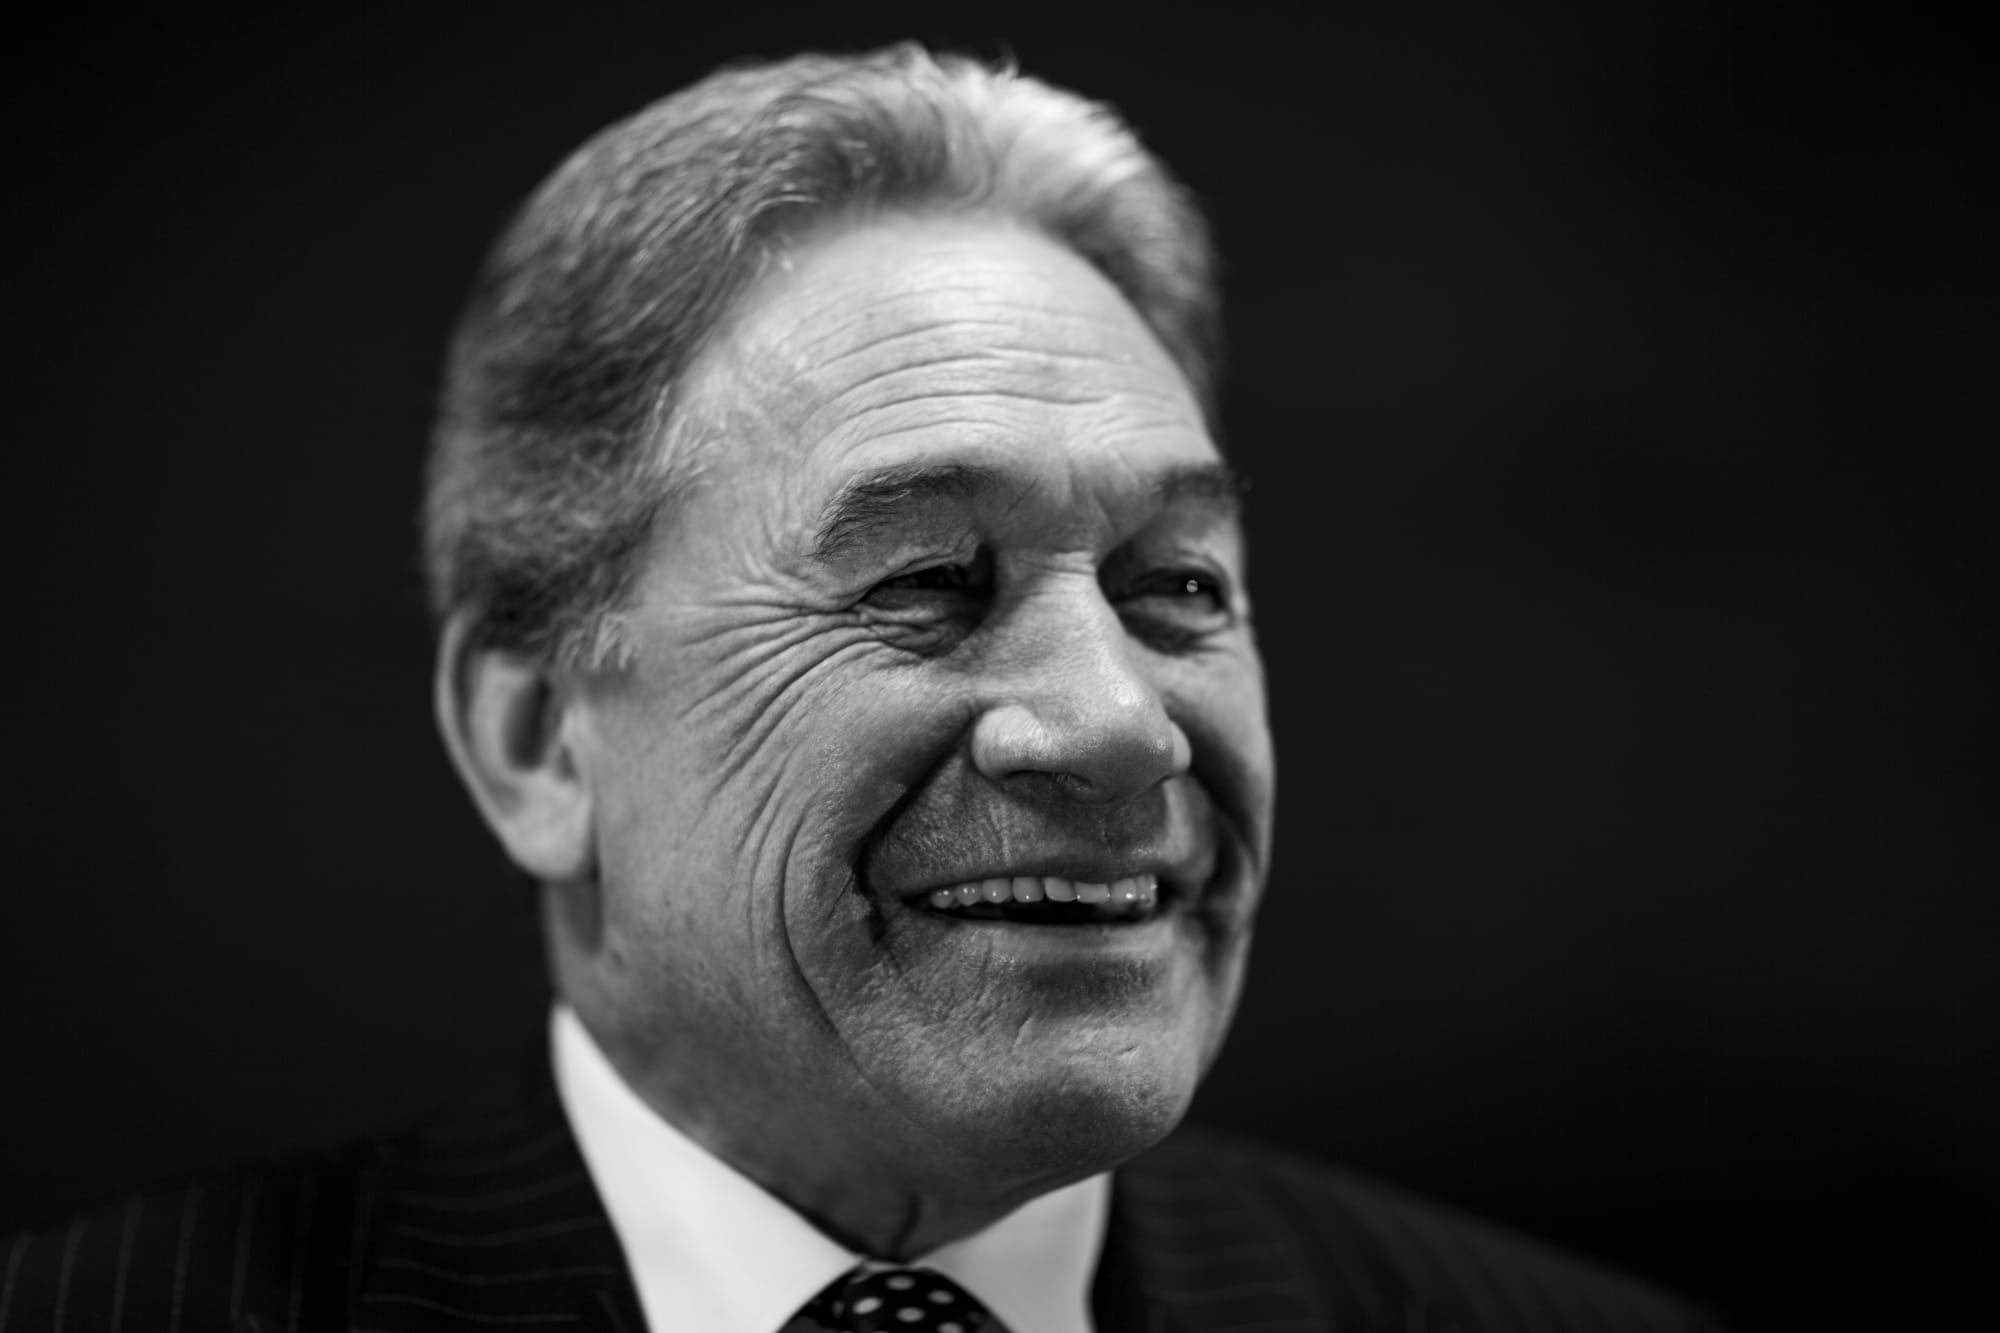 New Zealand First leader Winston Peters